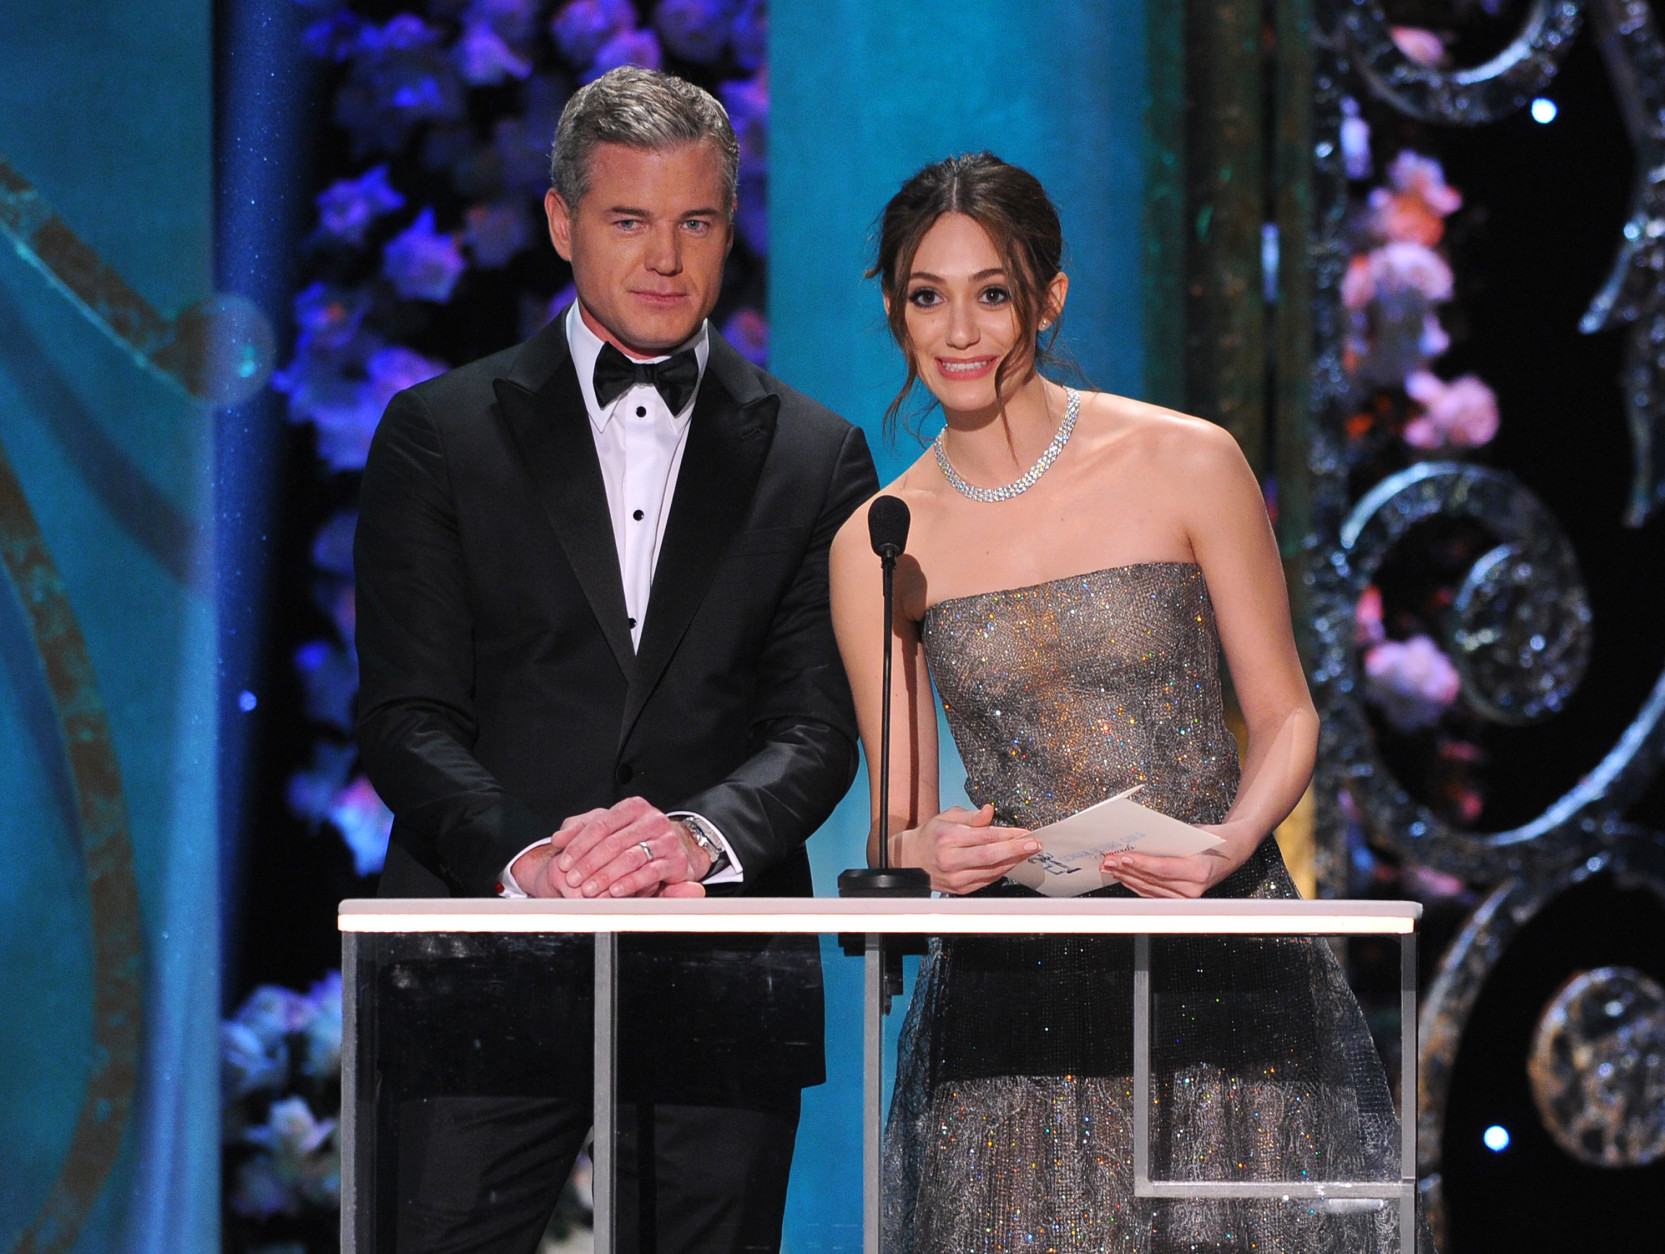 Eric Dane, left, and Emmy Rossum present the award for outstanding performance by a male actor in a drama series at the 21st annual Screen Actors Guild Awards at the Shrine Auditorium on Sunday, Jan. 25, 2015, in Los Angeles. (Photo by Vince Bucci/Invision/AP)